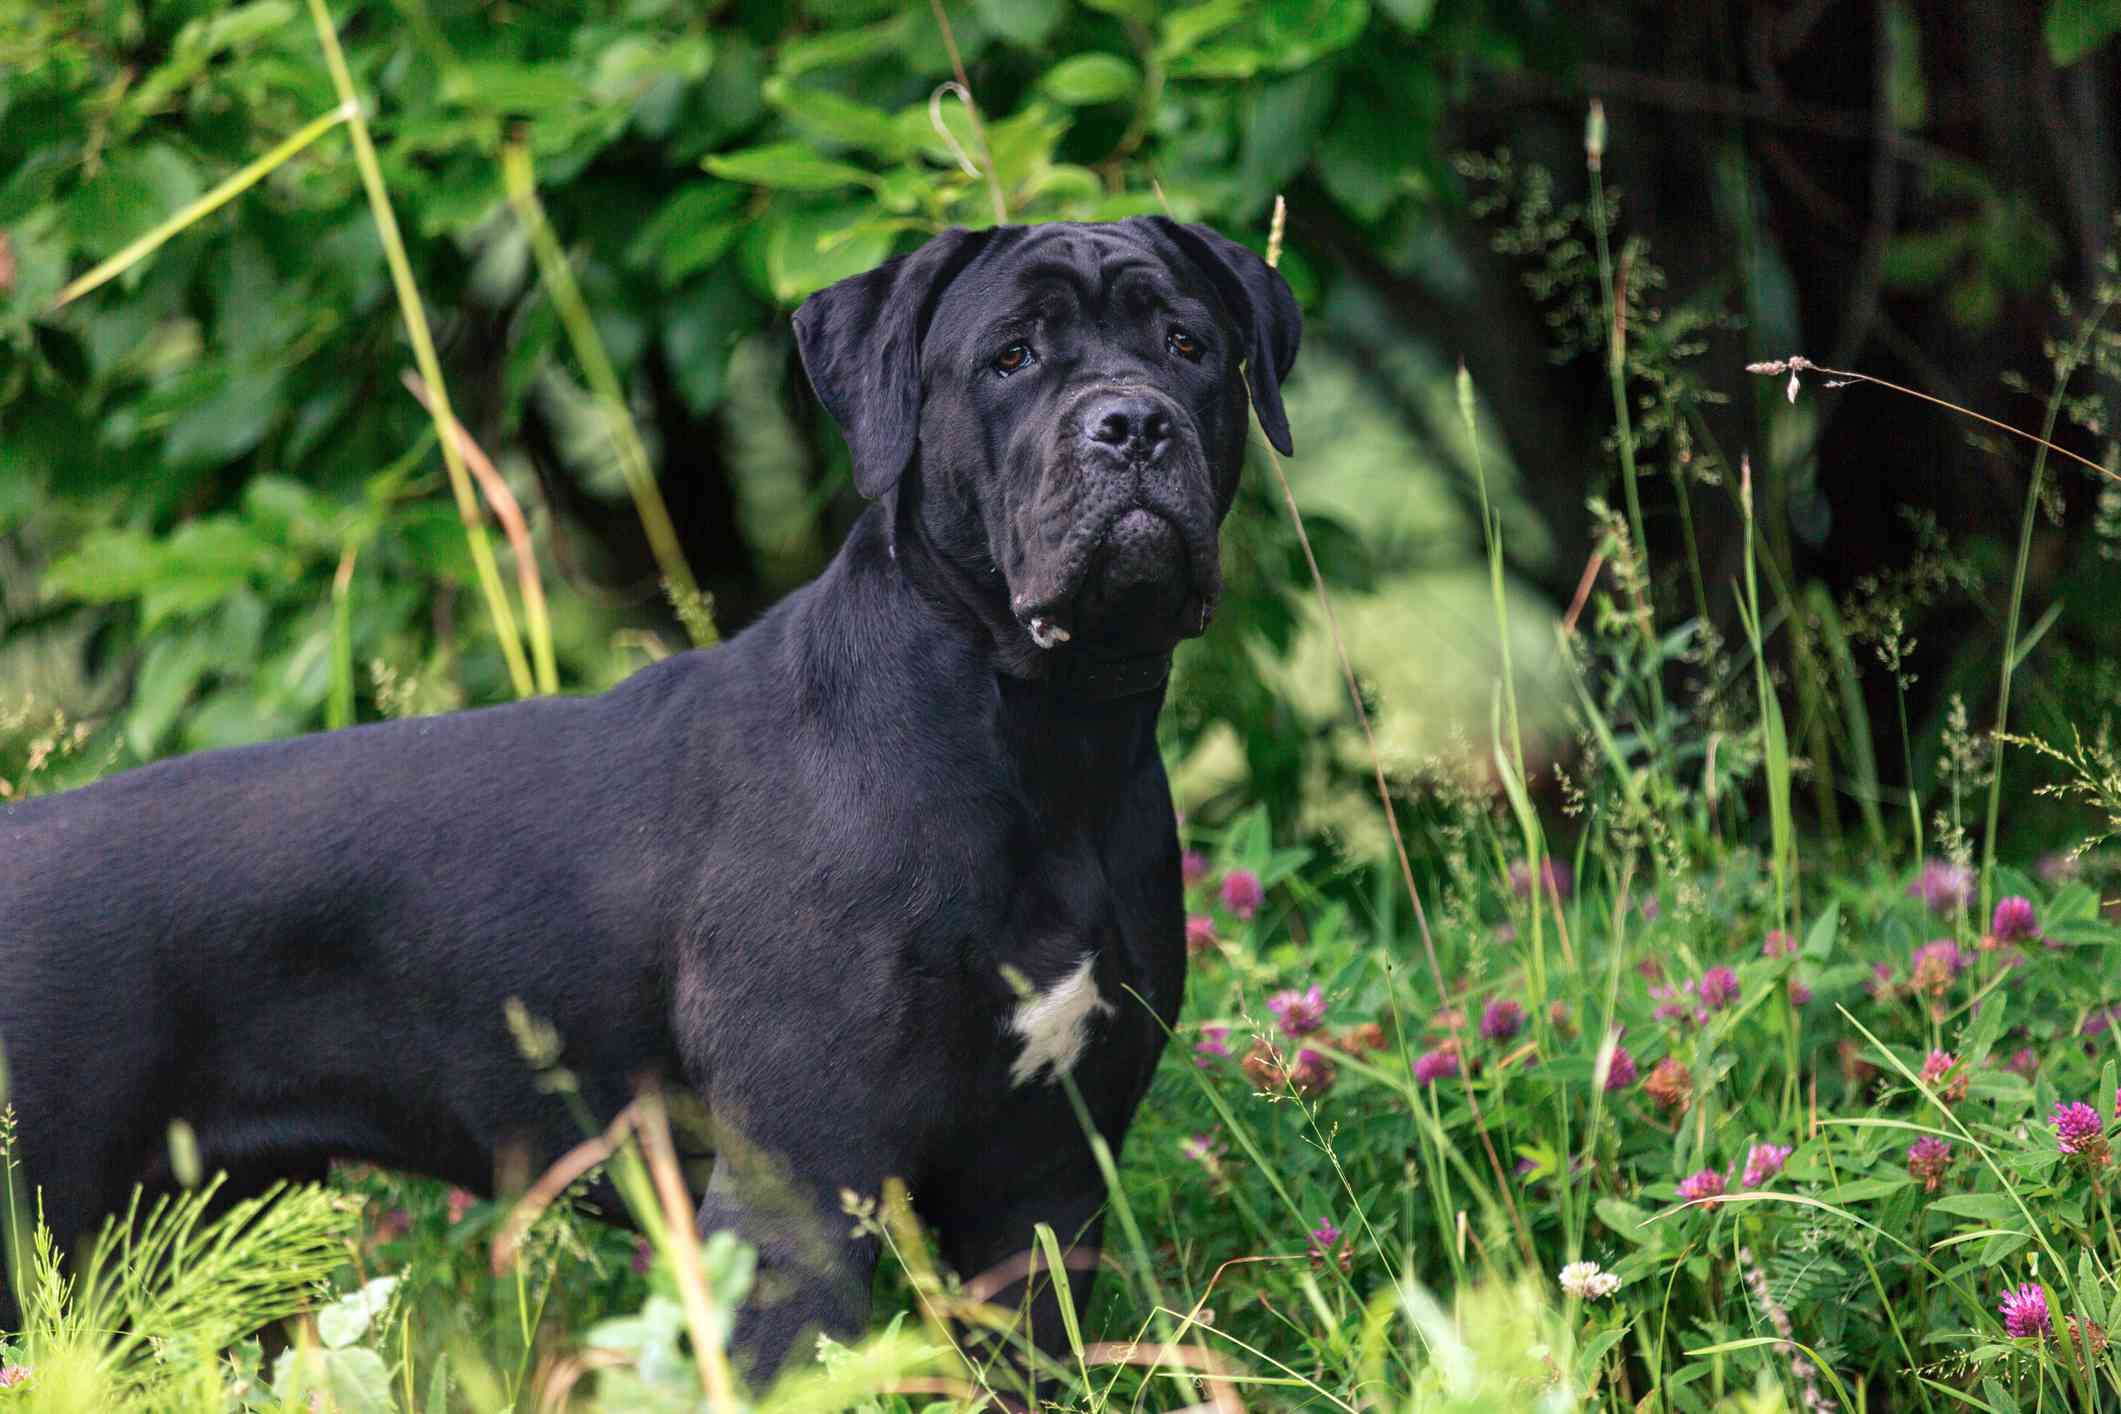 Black Cane Corso standig in long grass